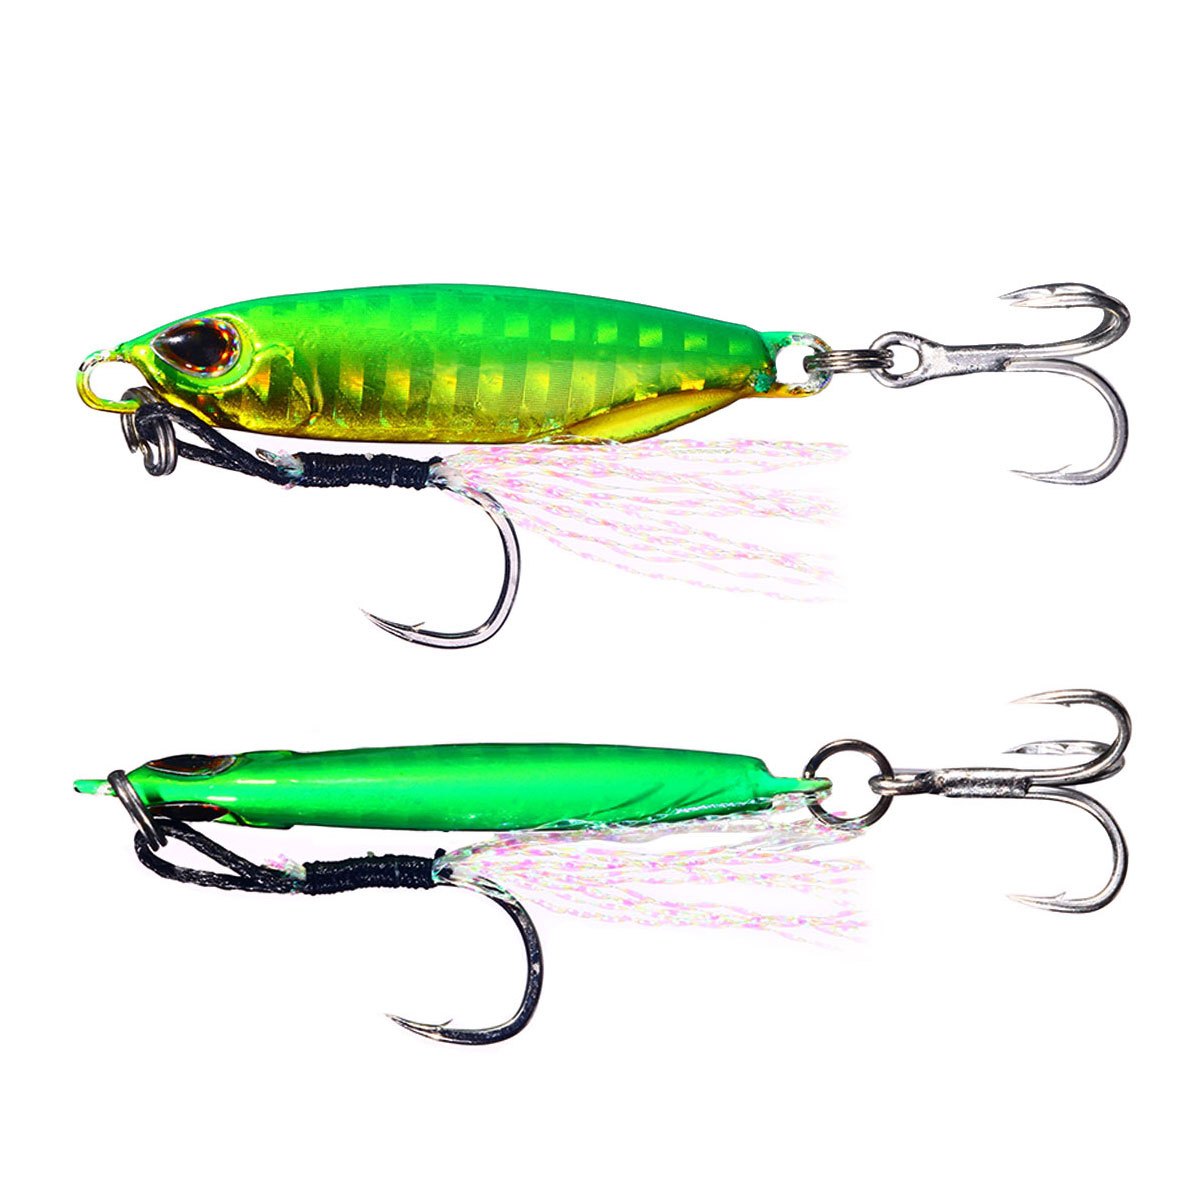 HENGJIA 1PCS Saltwater Jigs Fishing Lures 10g-40g With Assist